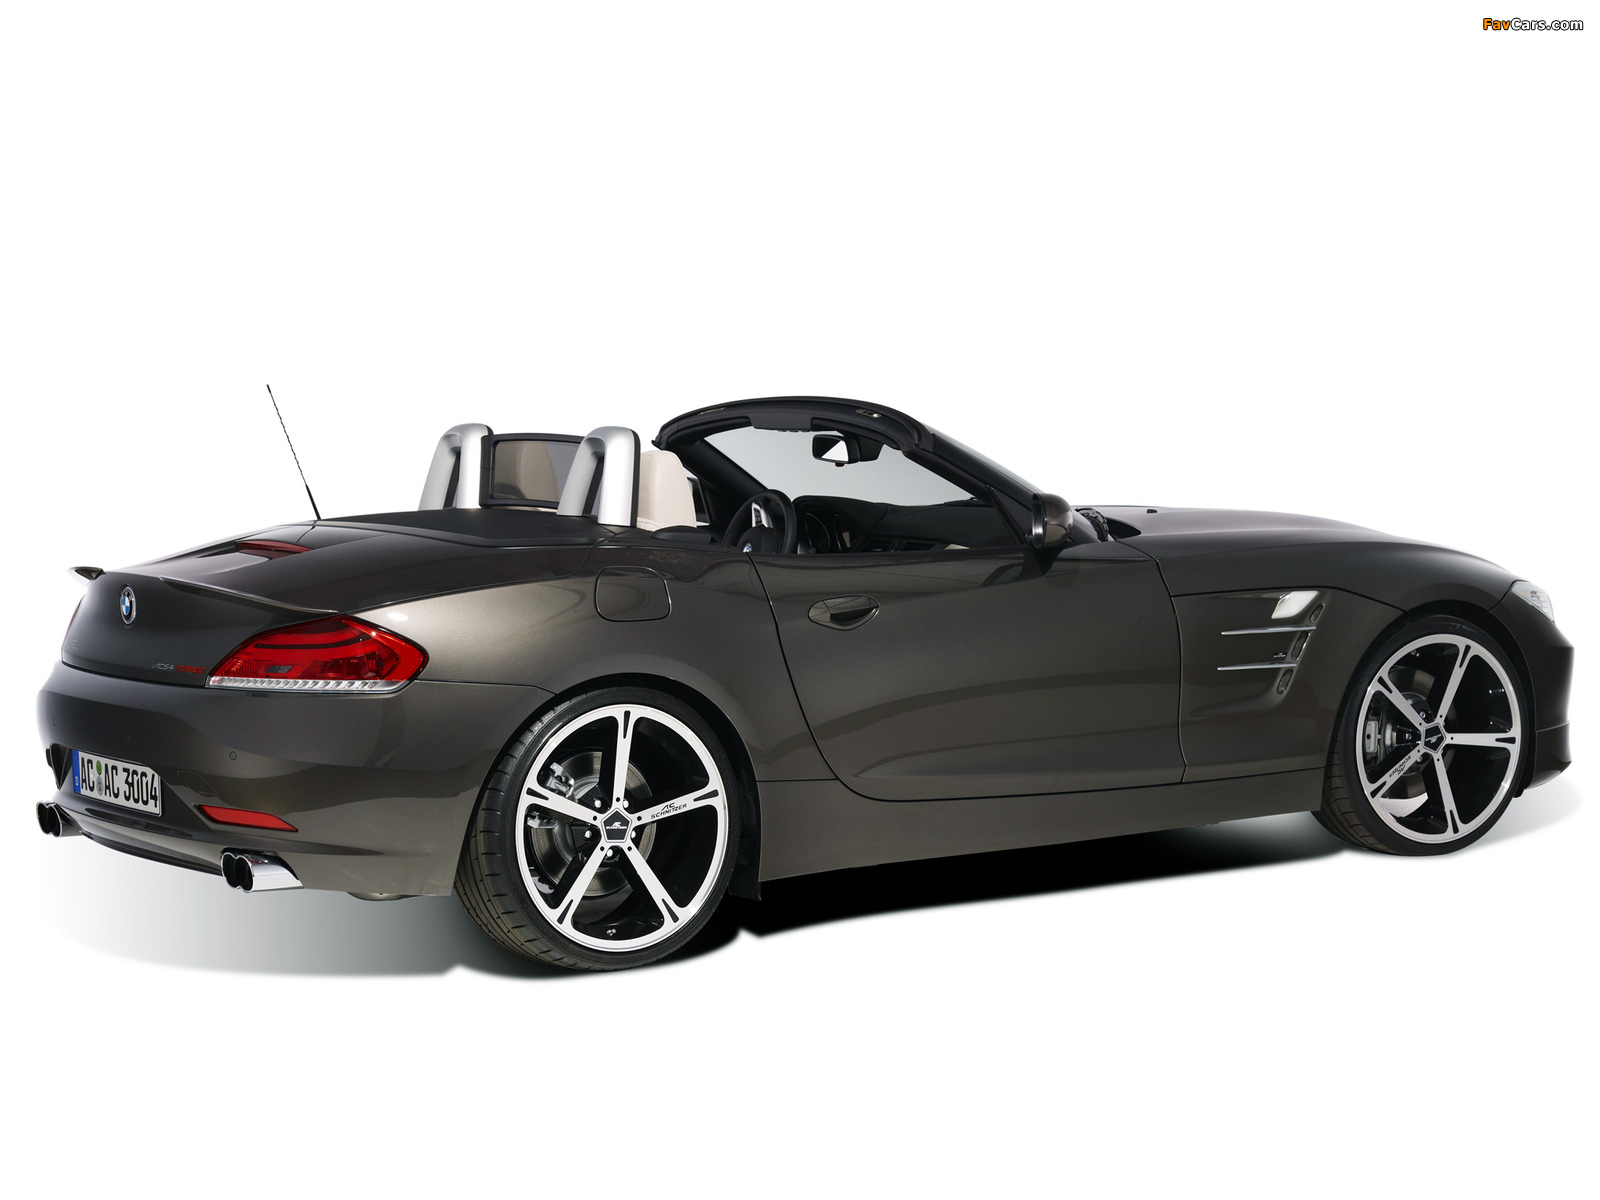 AC Schnitzer ACS4 Turbo Roadster (E89) 2009 wallpapers (1600 x 1200)